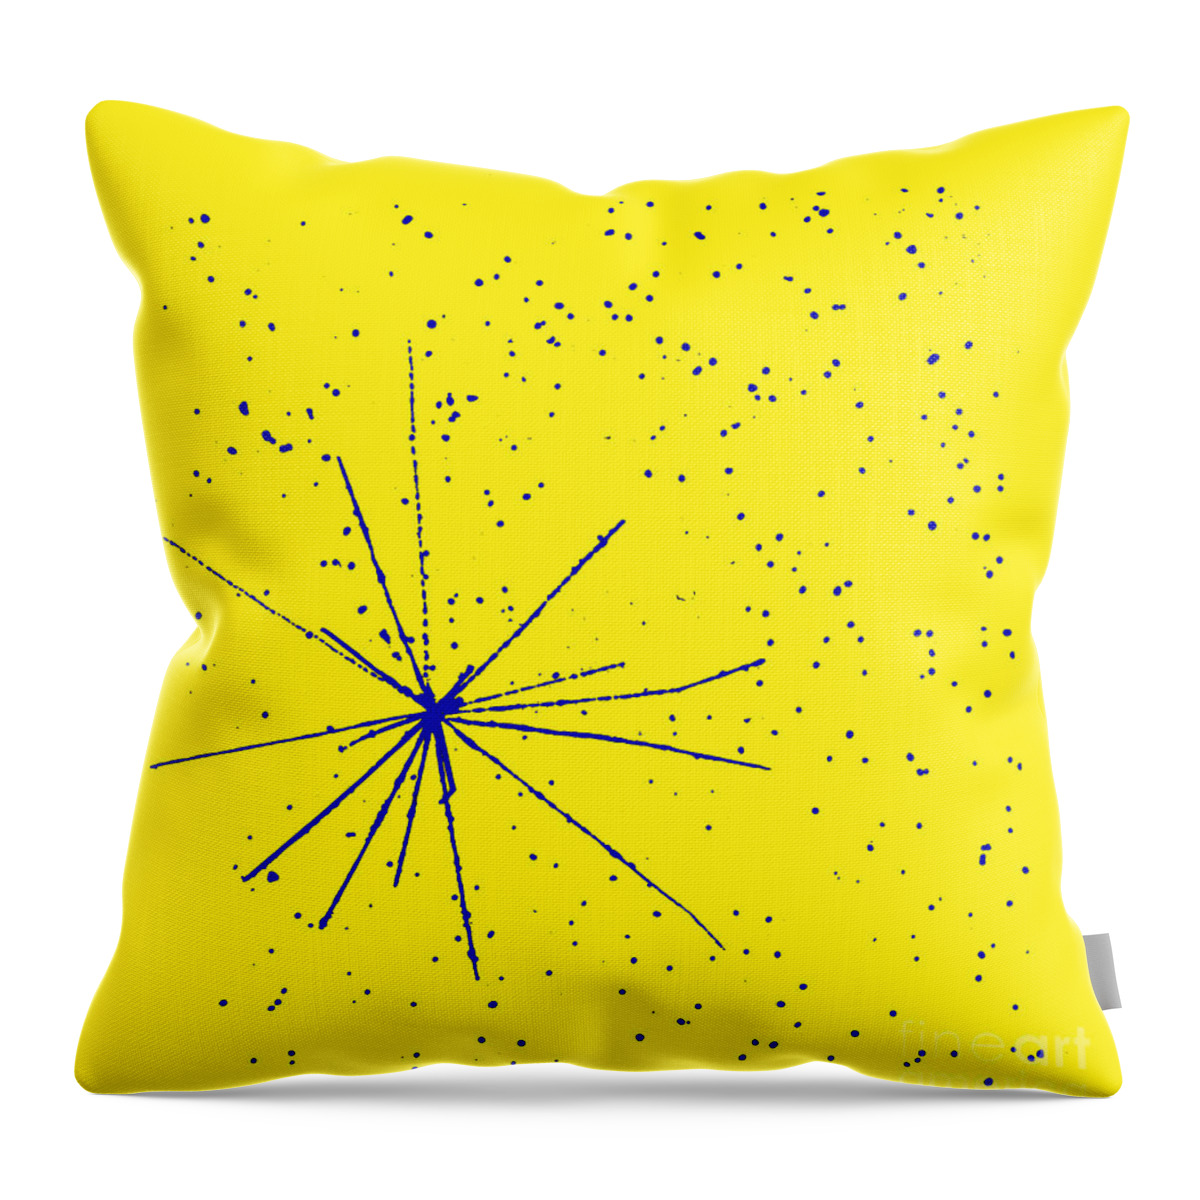 History Throw Pillow featuring the photograph Particle Tracks #1 by Omikron